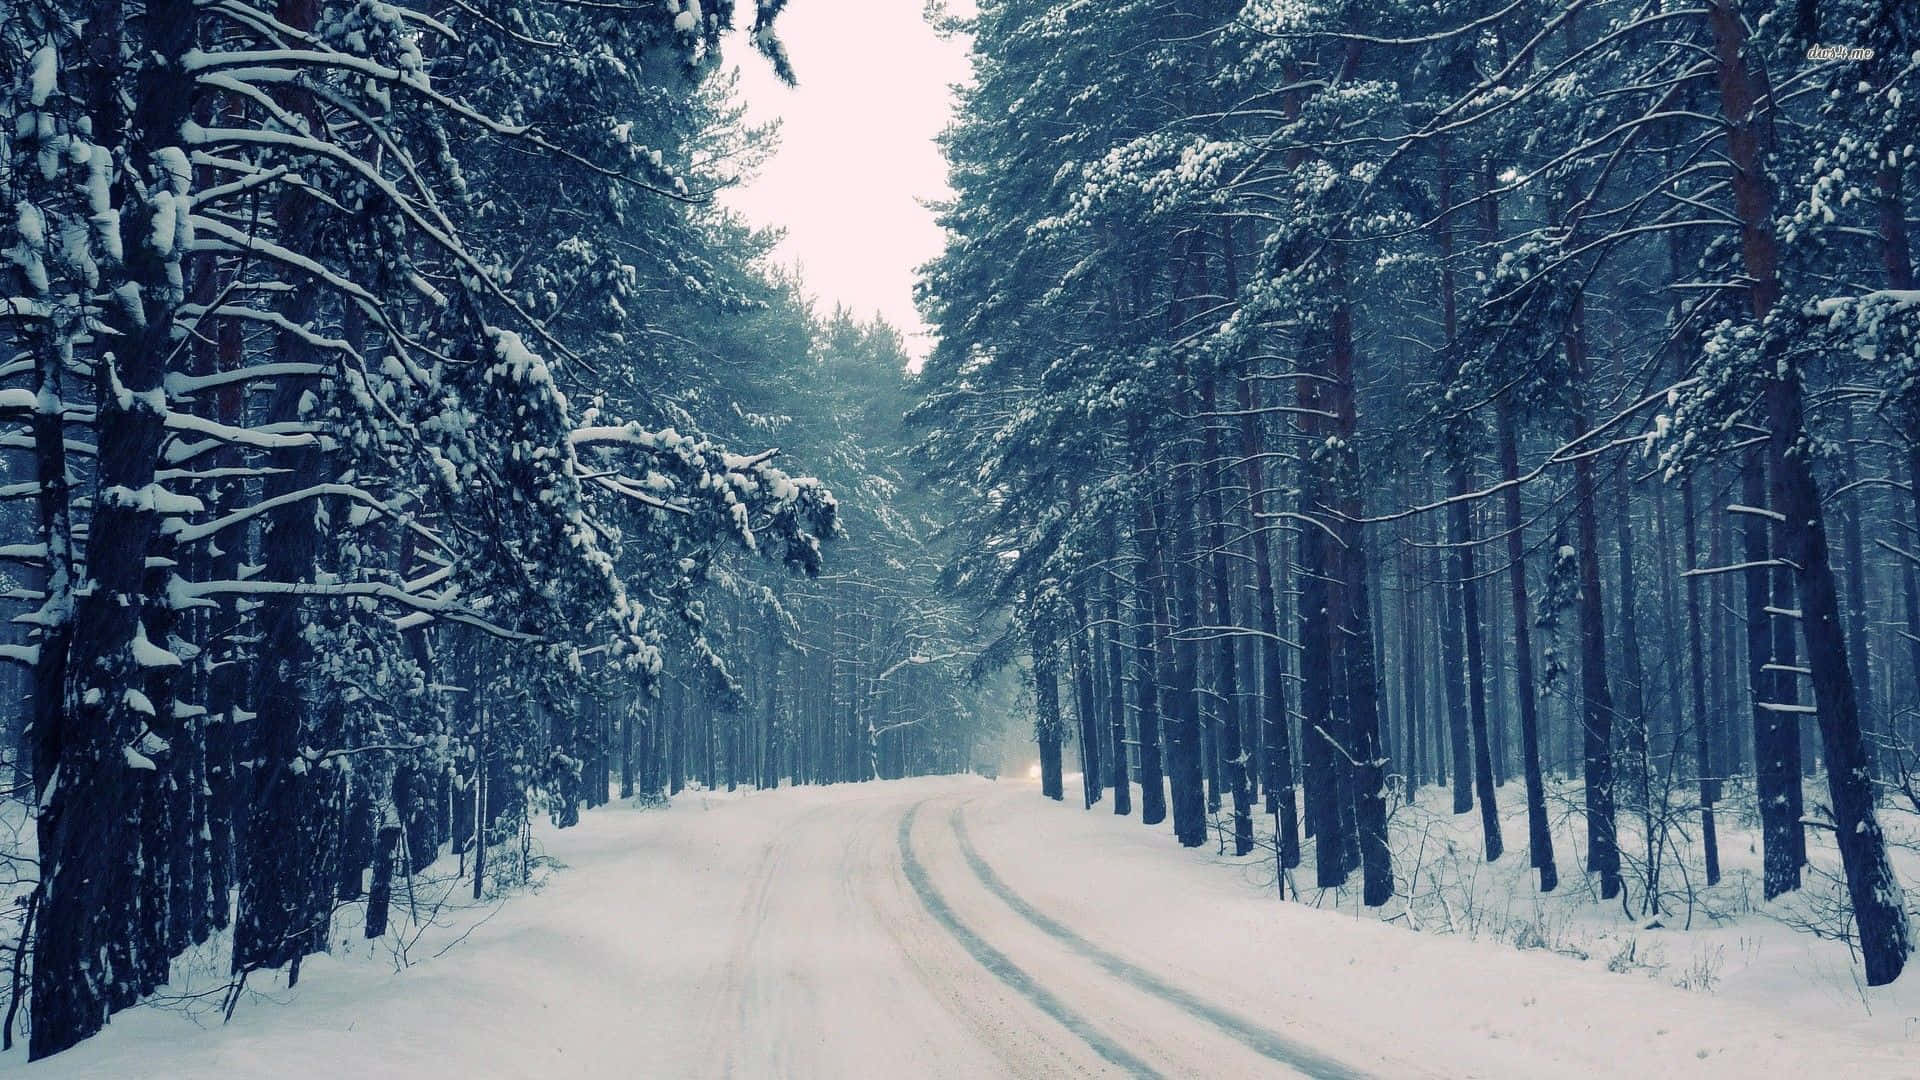 A Snow Covered Road In A Forest